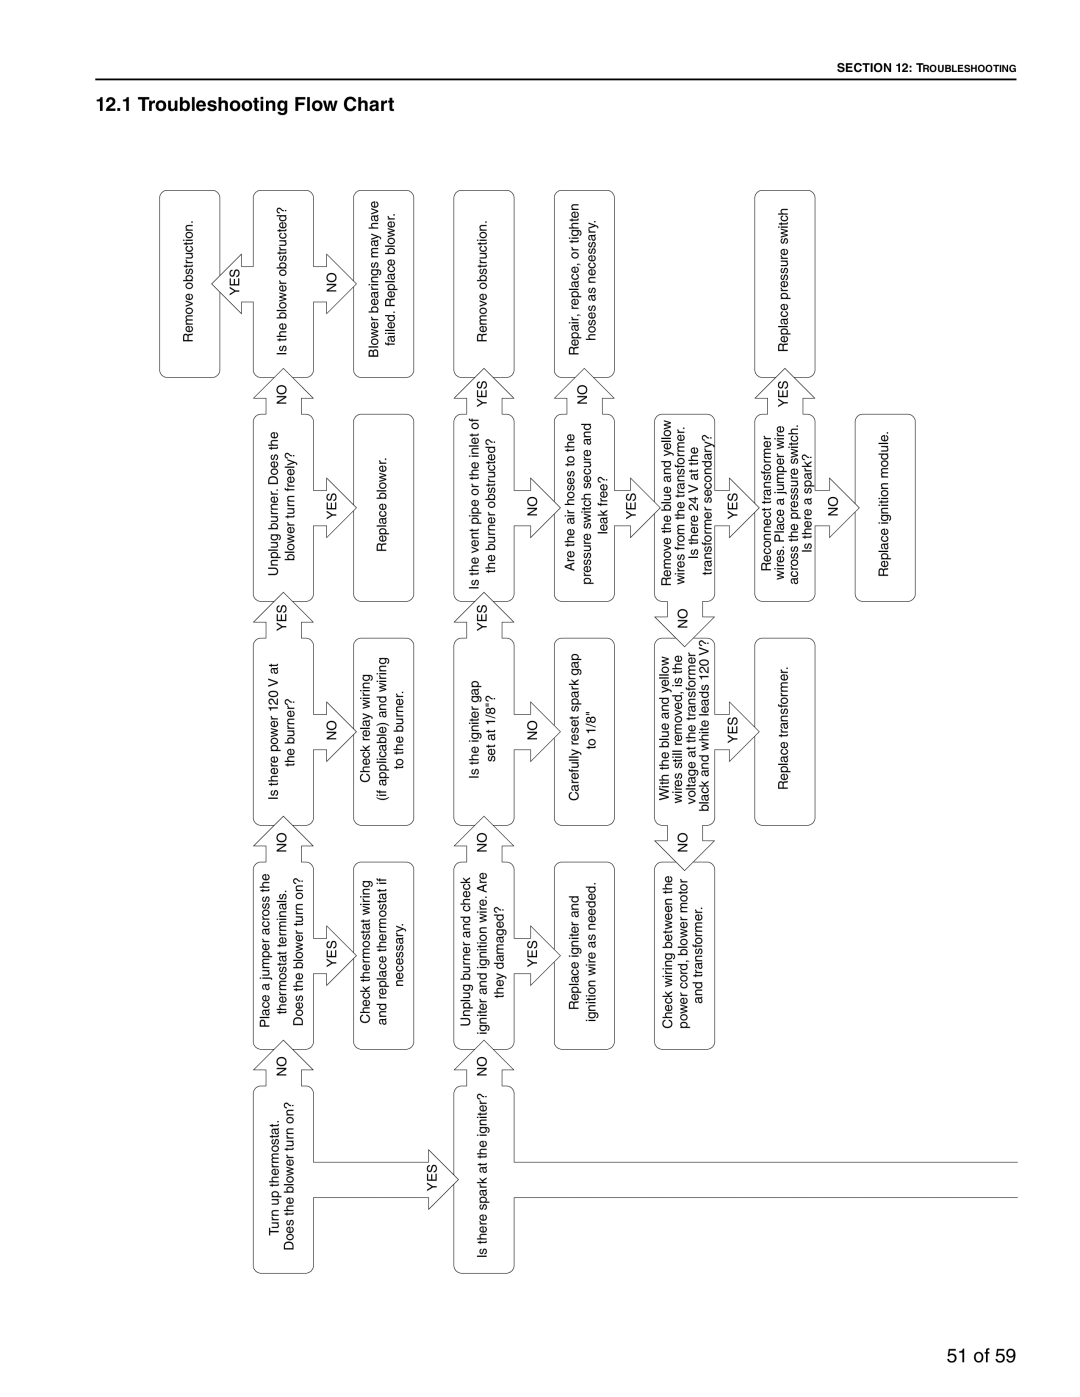 Roberts Gorden BH-200, BH-60, BH-40, BH-150, BH-175, BH-115, BH-100, BH-140, BH-80, BH-125 Troubleshooting Flow Chart, 51 of 